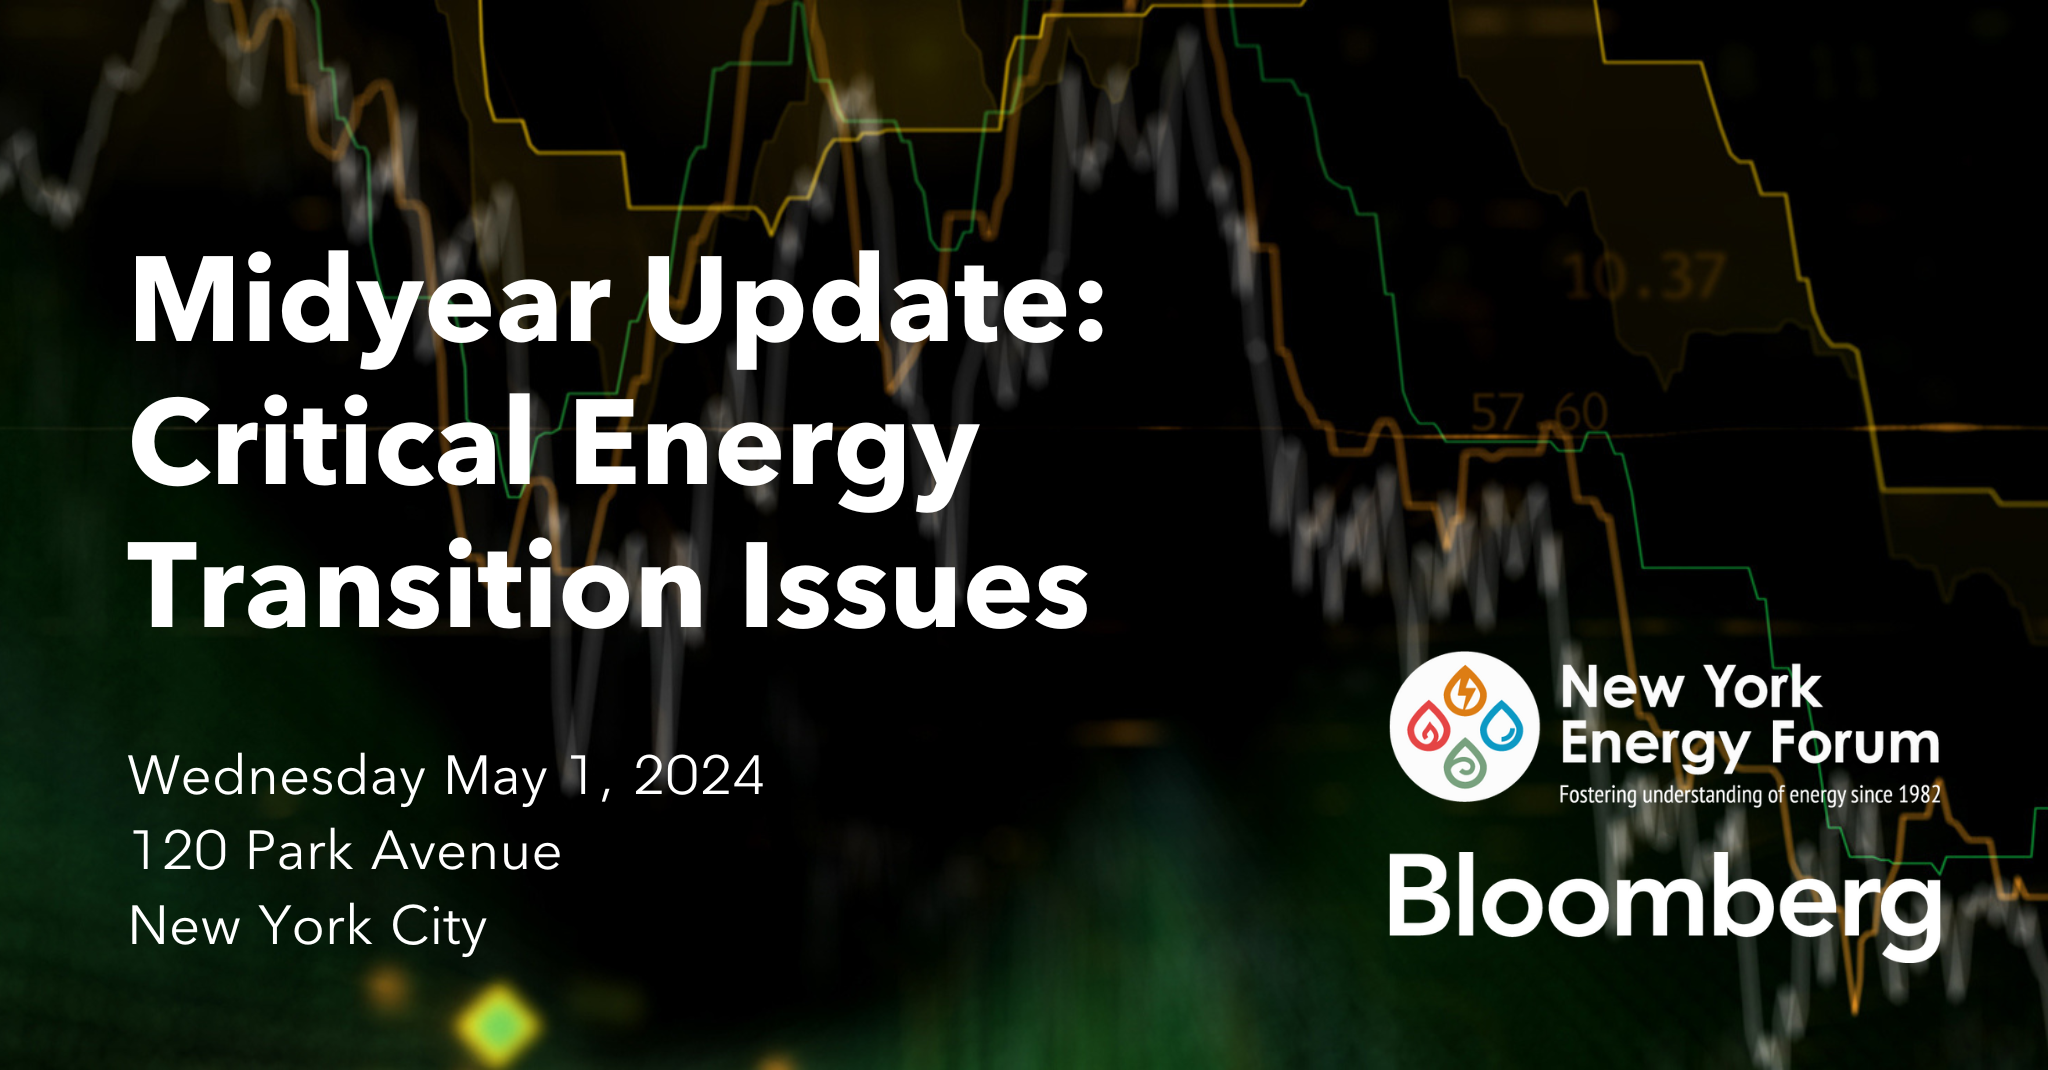 Midyear Update: Critical Energy Transition Issues